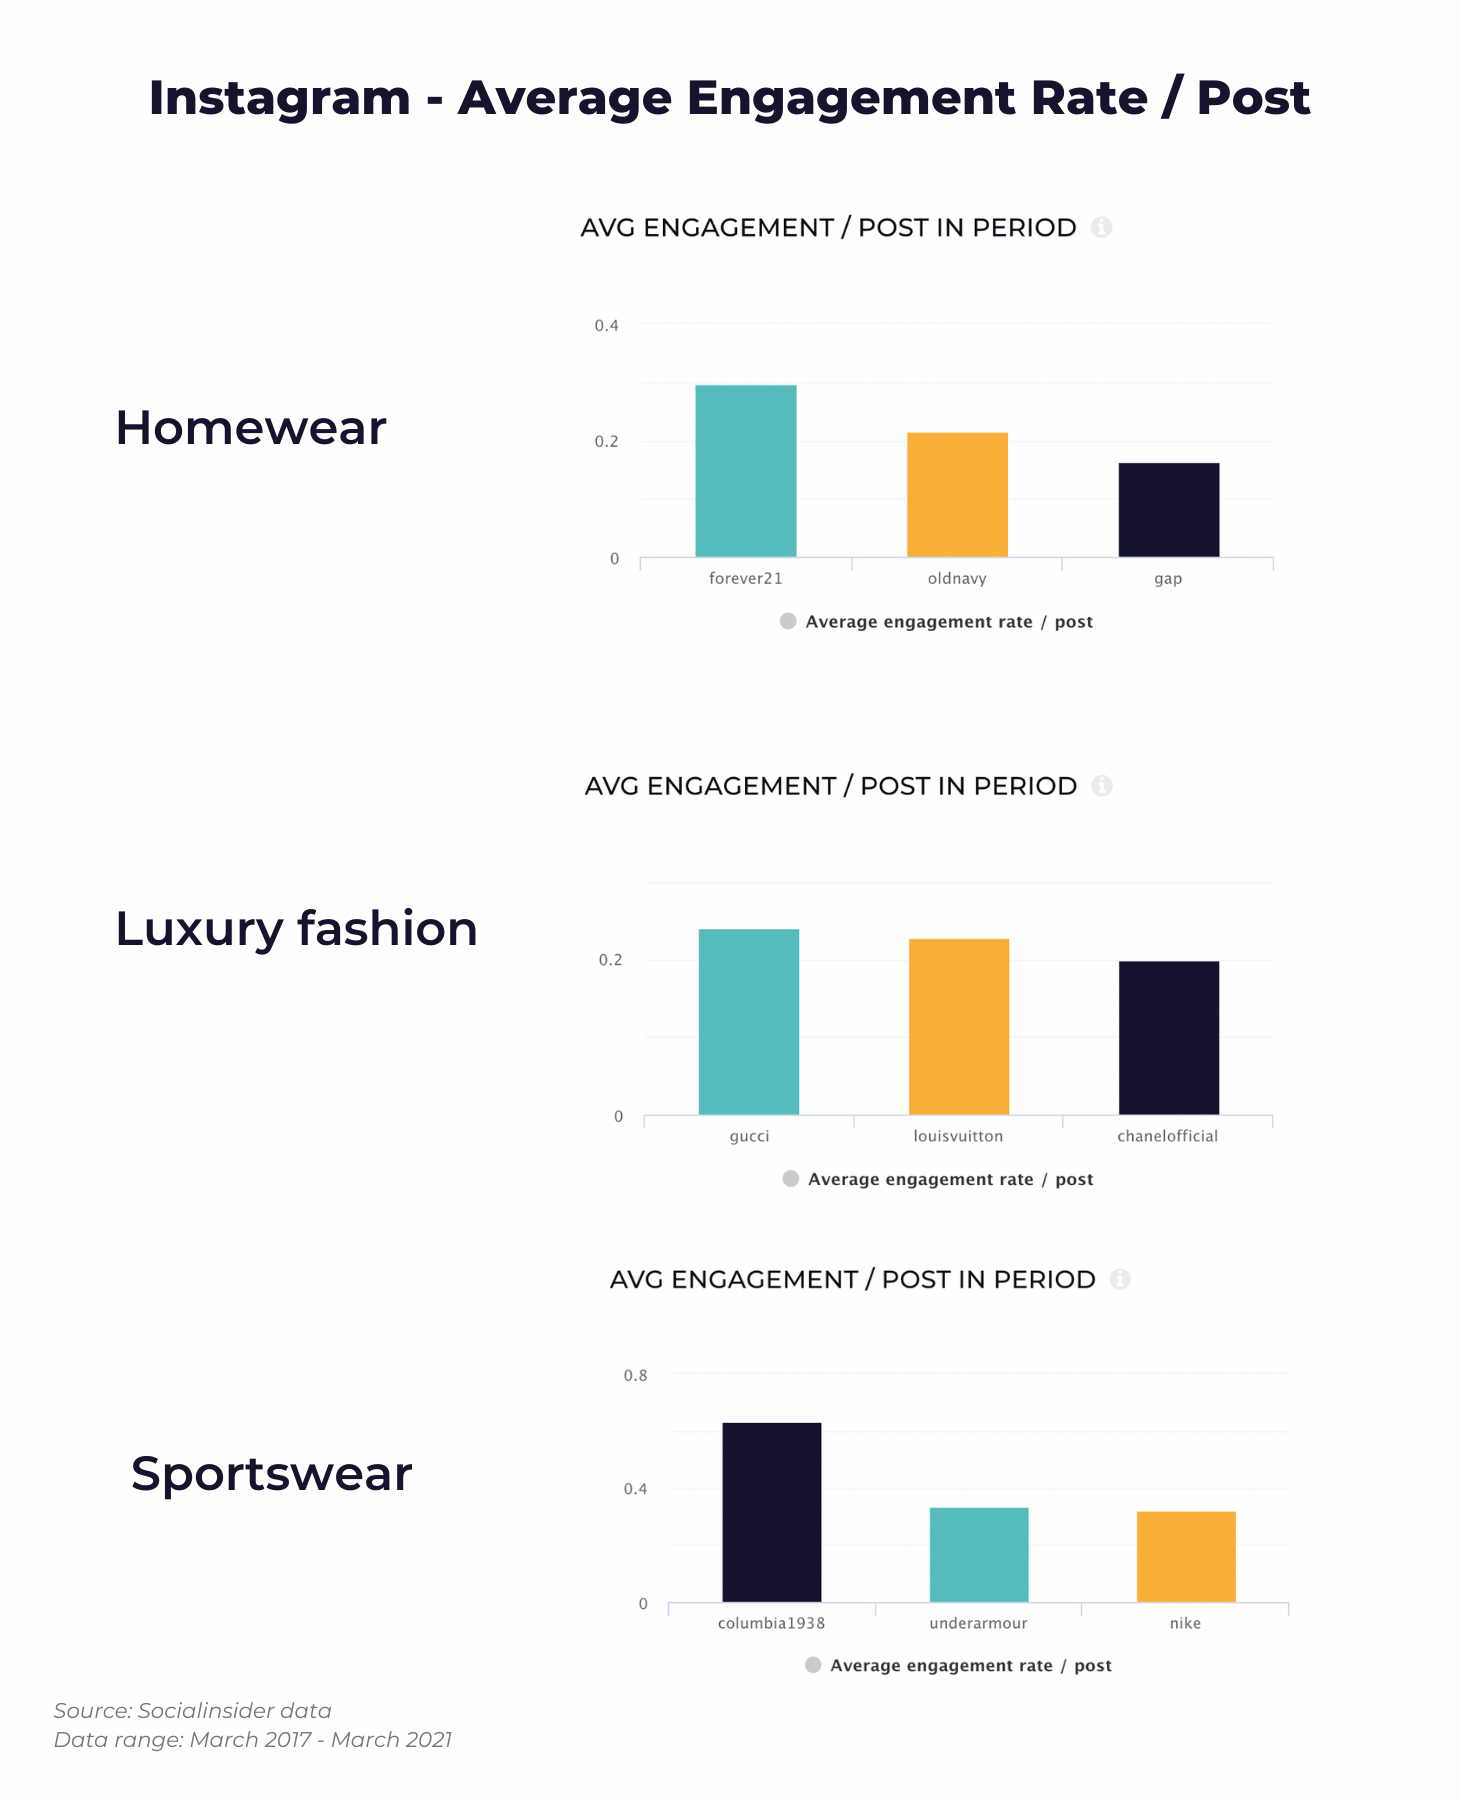 This chart shows the engagement stats for fashion brands across all social platforms.